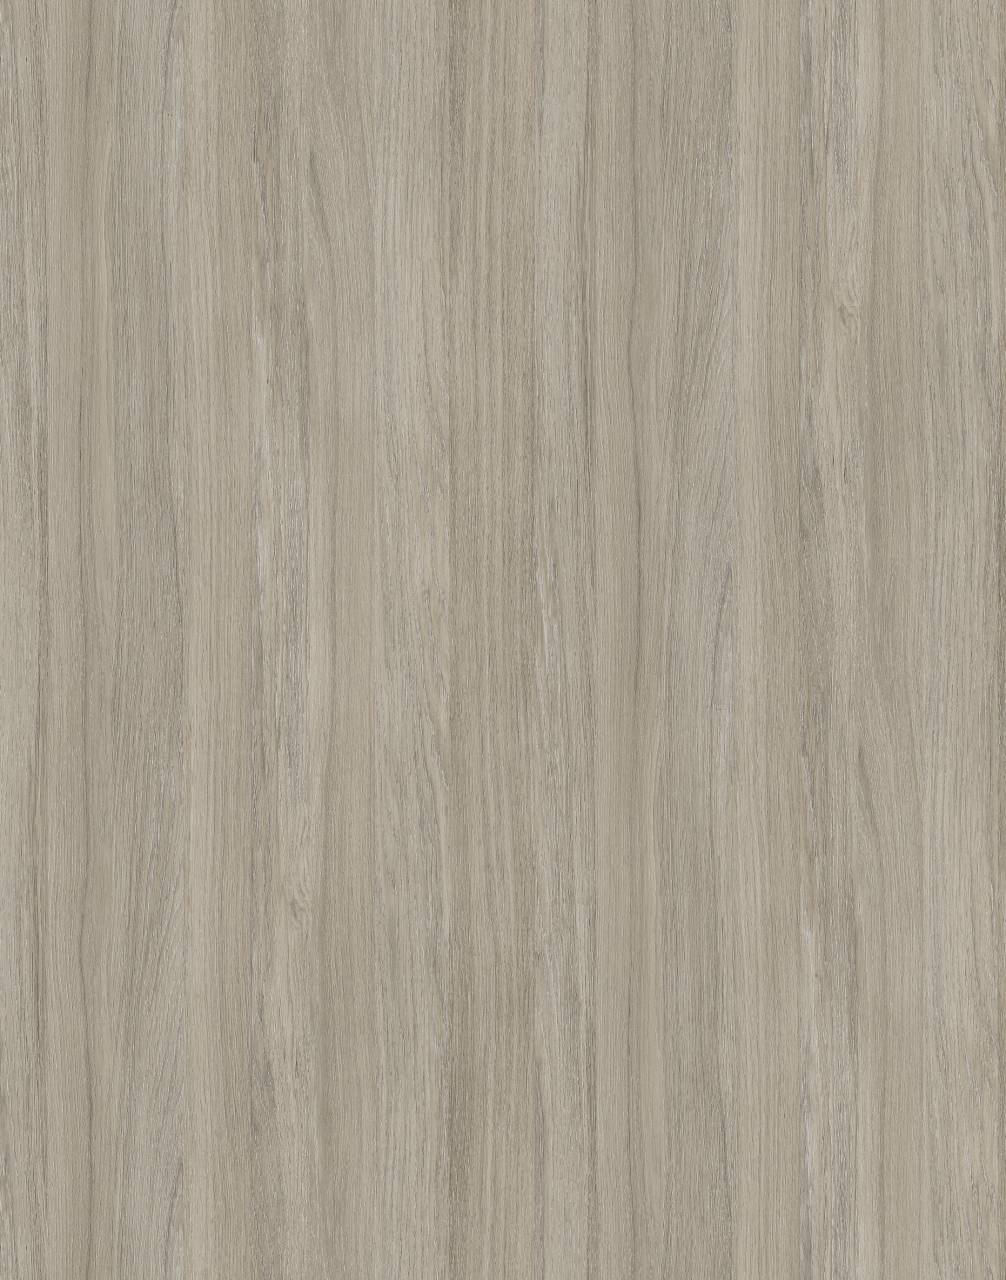 Oyster Urban Oak PW HPL with smooth surface and light grey tones for a contemporary and versatile look.